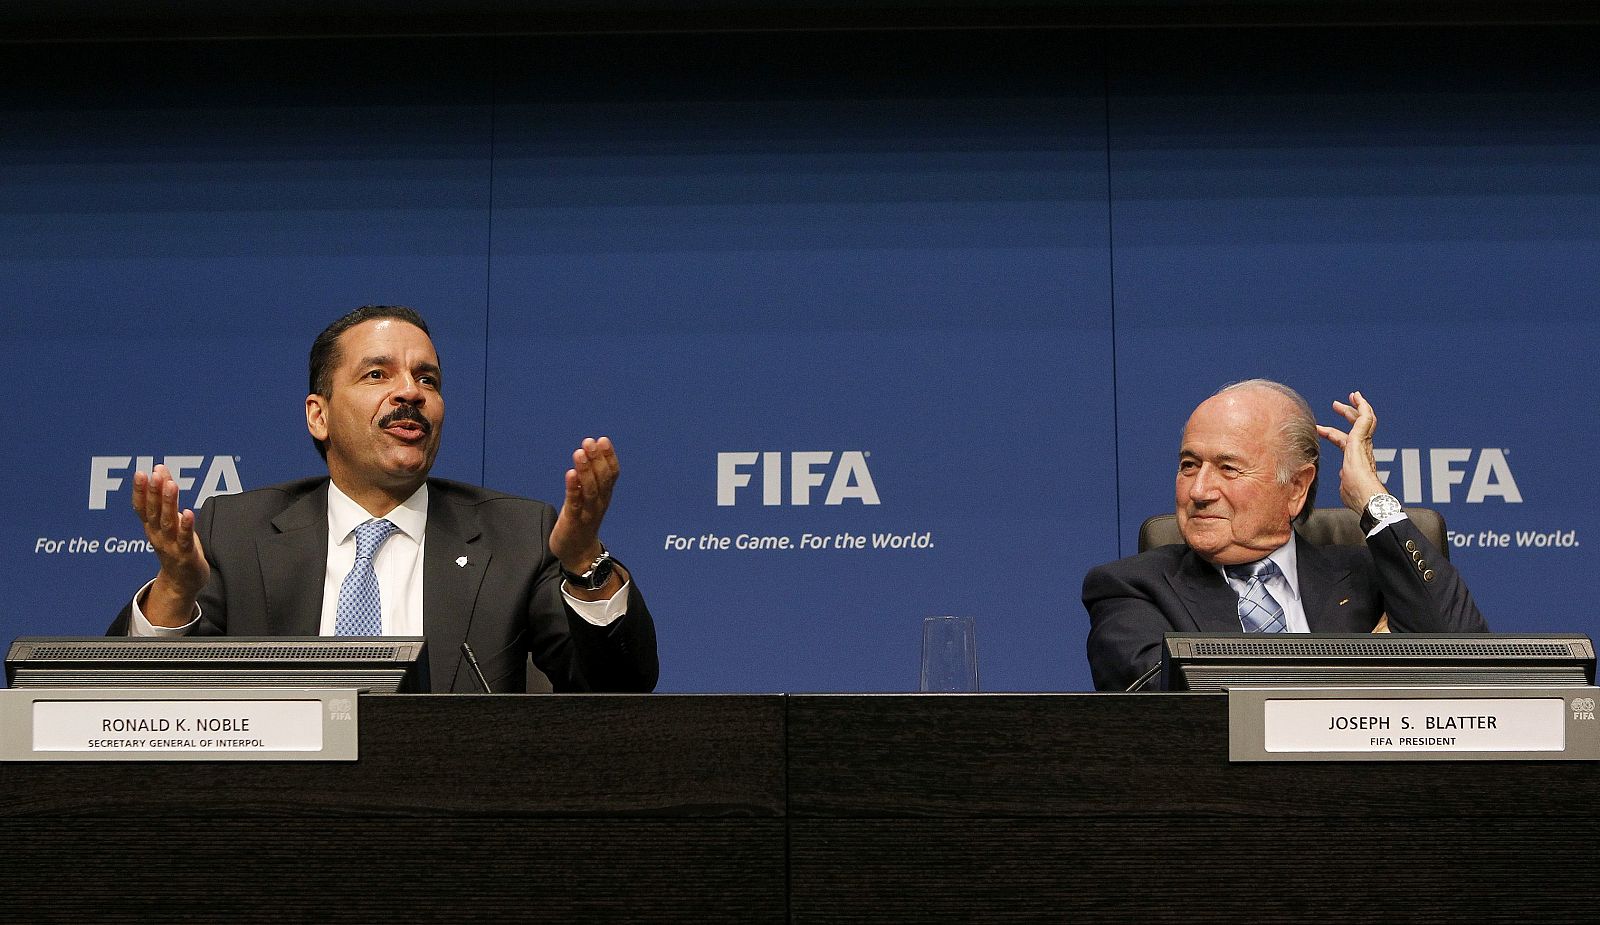 FIFA President Blatter and and Interpol's Secretary General Noble